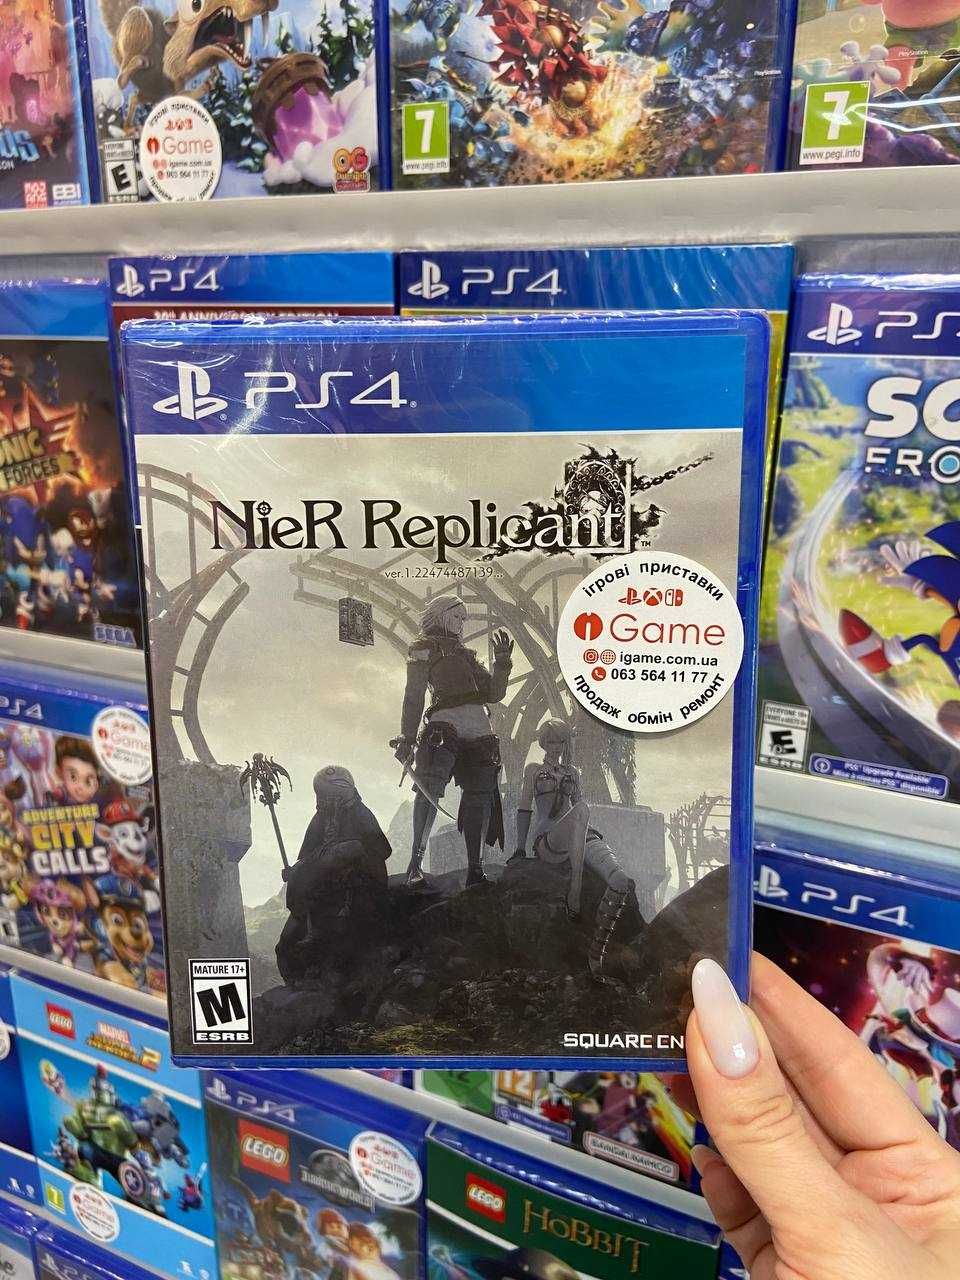 NieR Replicant ENG PS4 igame